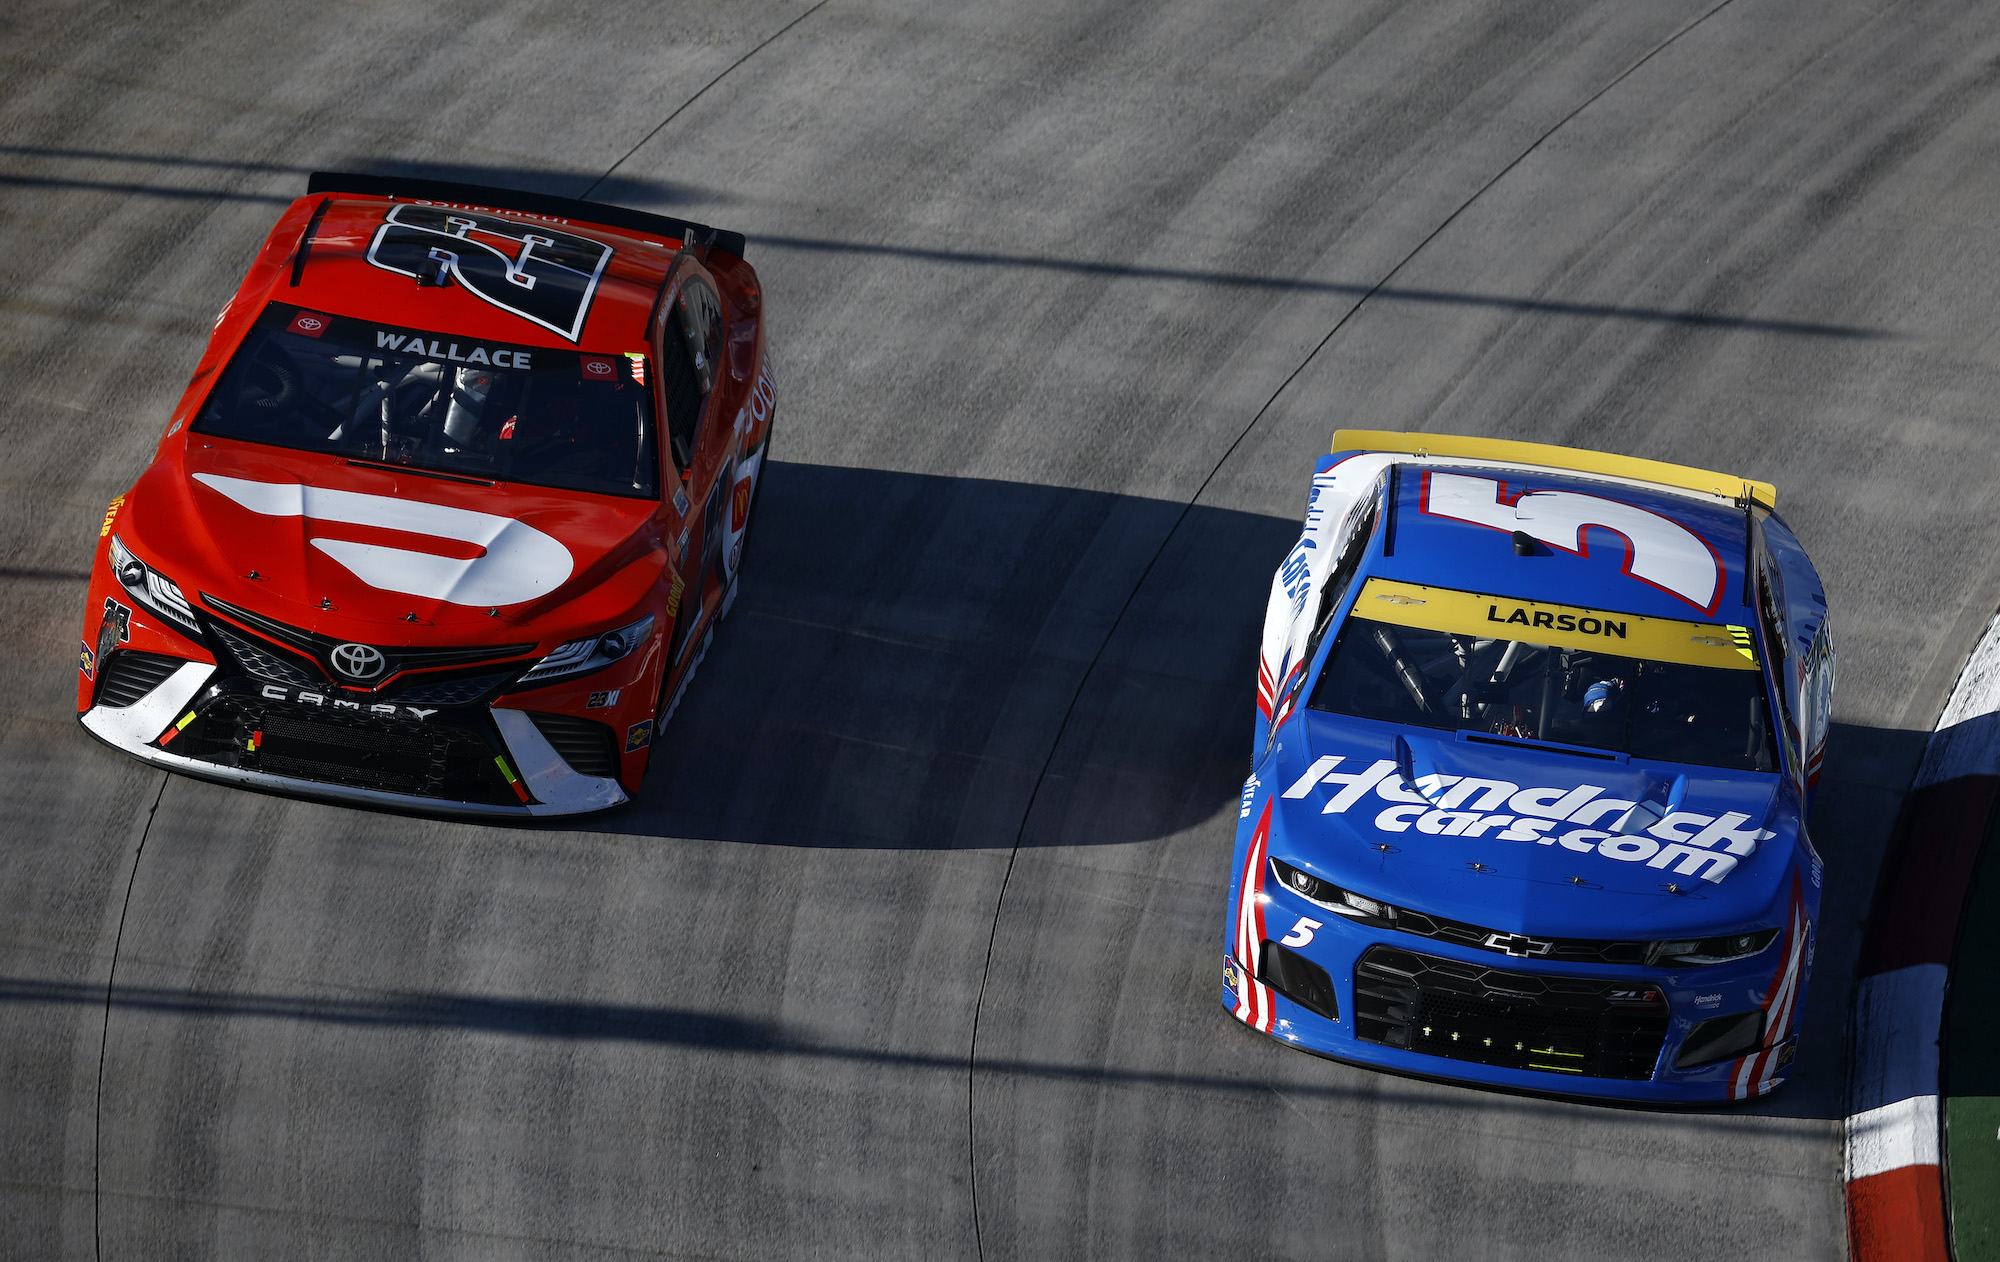 Kyle Larson and Bubba Wallace race